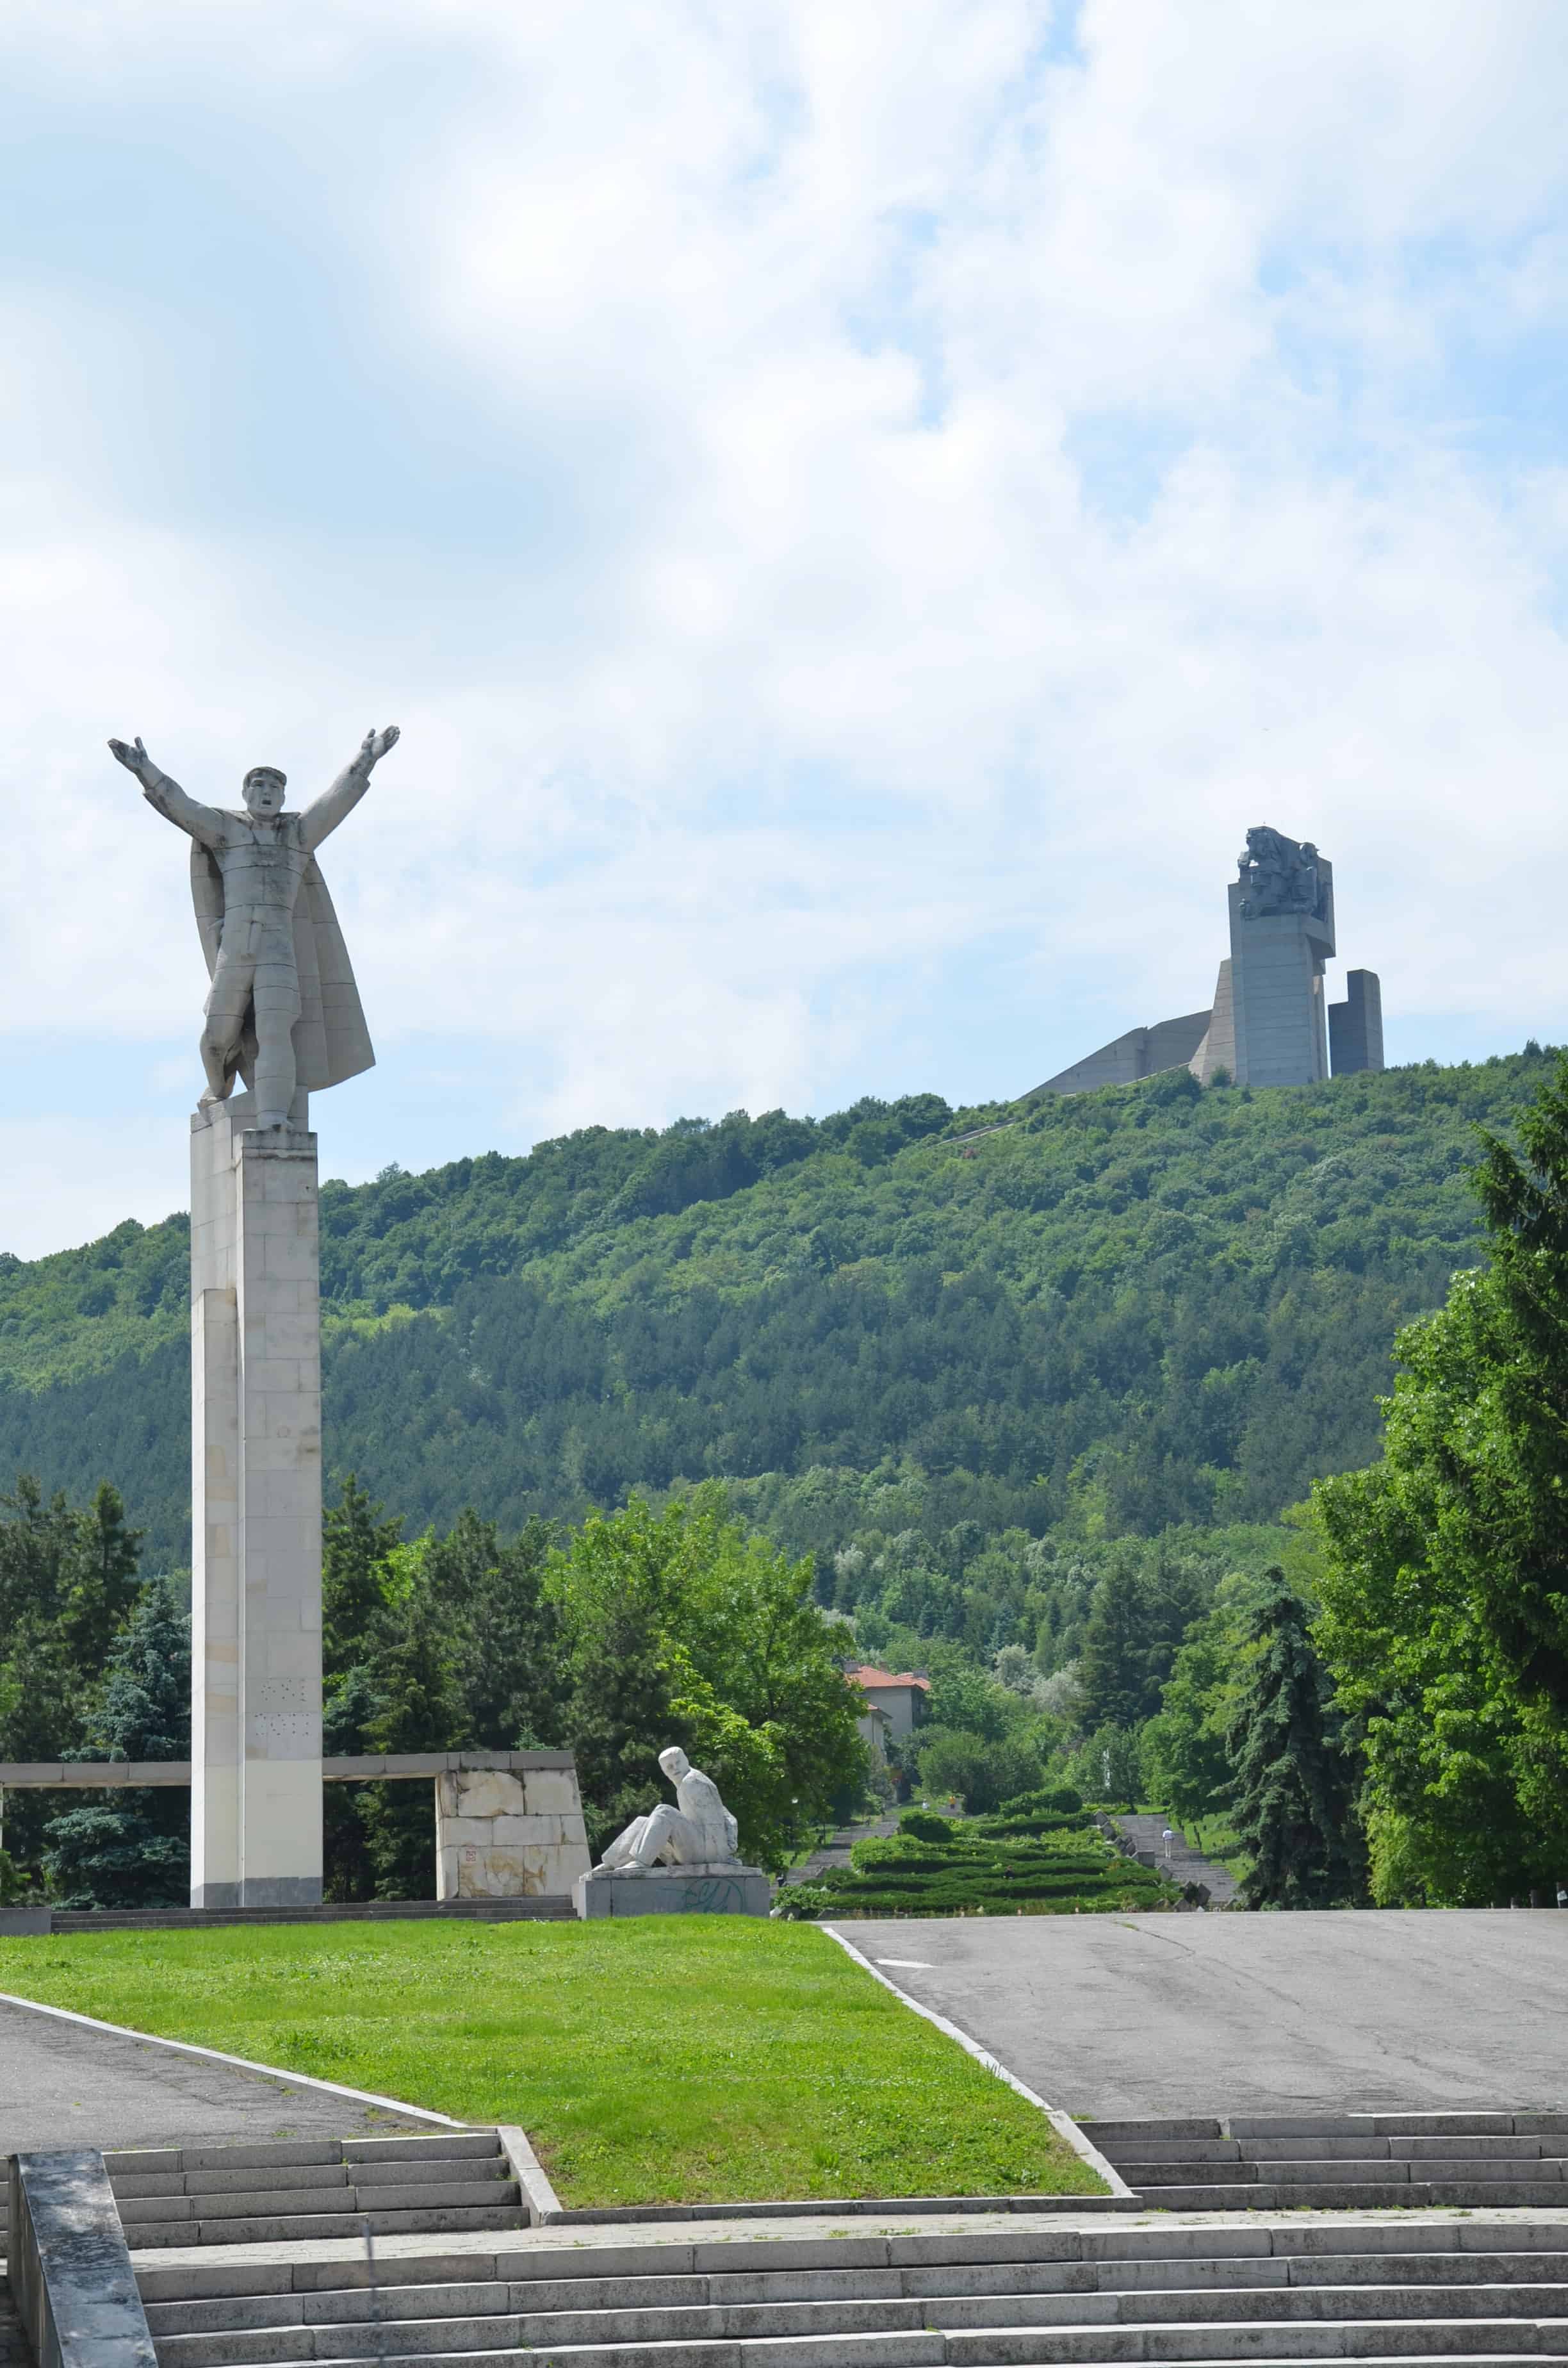 Monument of Freedom (foreground) and Founders of the Bulgarian State Monument (background) in Shumen, Bulgaria